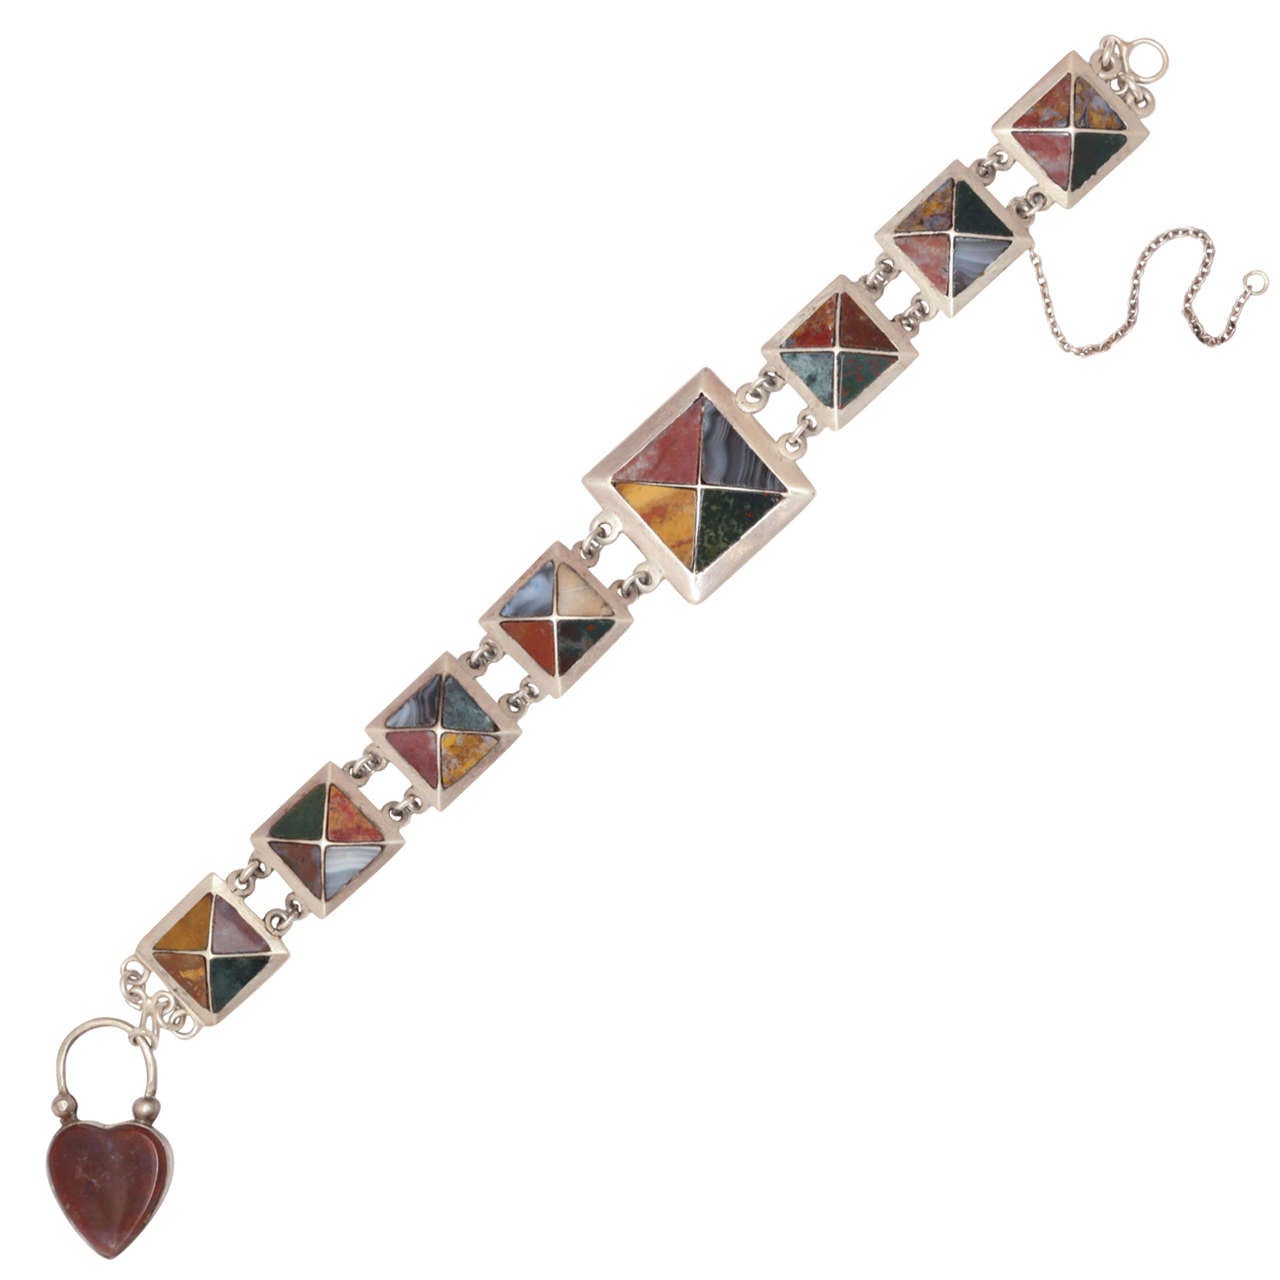 Scottish talent at agate carving was tradition for hundreds of years but blossomed in the Victorian age with the attachment Queen Victorian and Prince Albert felt to Scottish history. This bracelet, made between 1860 and 1880 consists of triangles